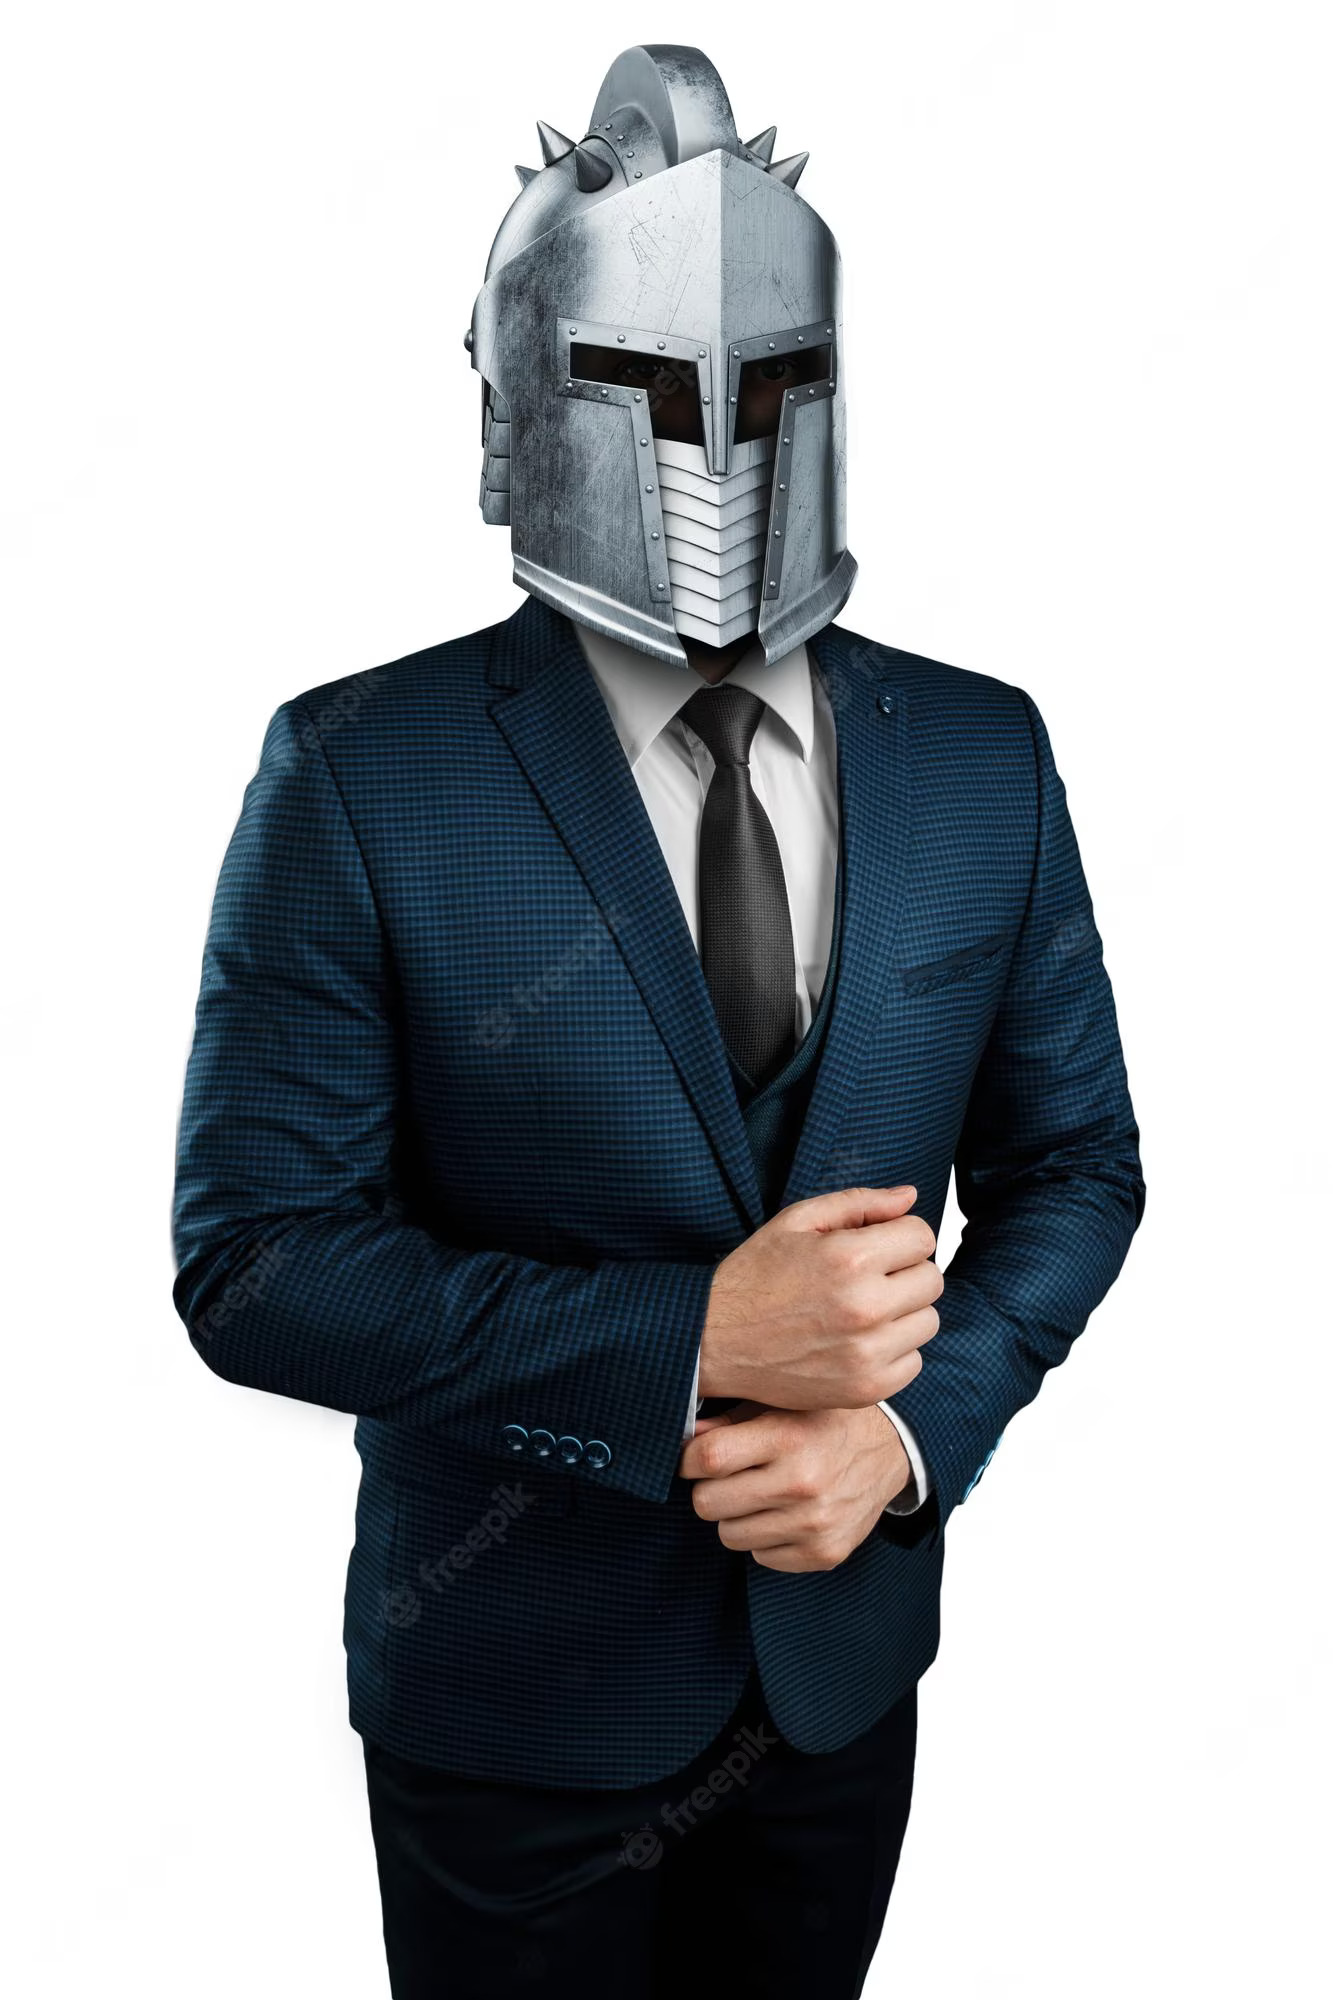 creative-image-man-suit-businessman-knight-s-helmet-his-head-white-background-concept-modern-hero-overcoming-difficulties-crisis-management-magazine-style_99433-8424